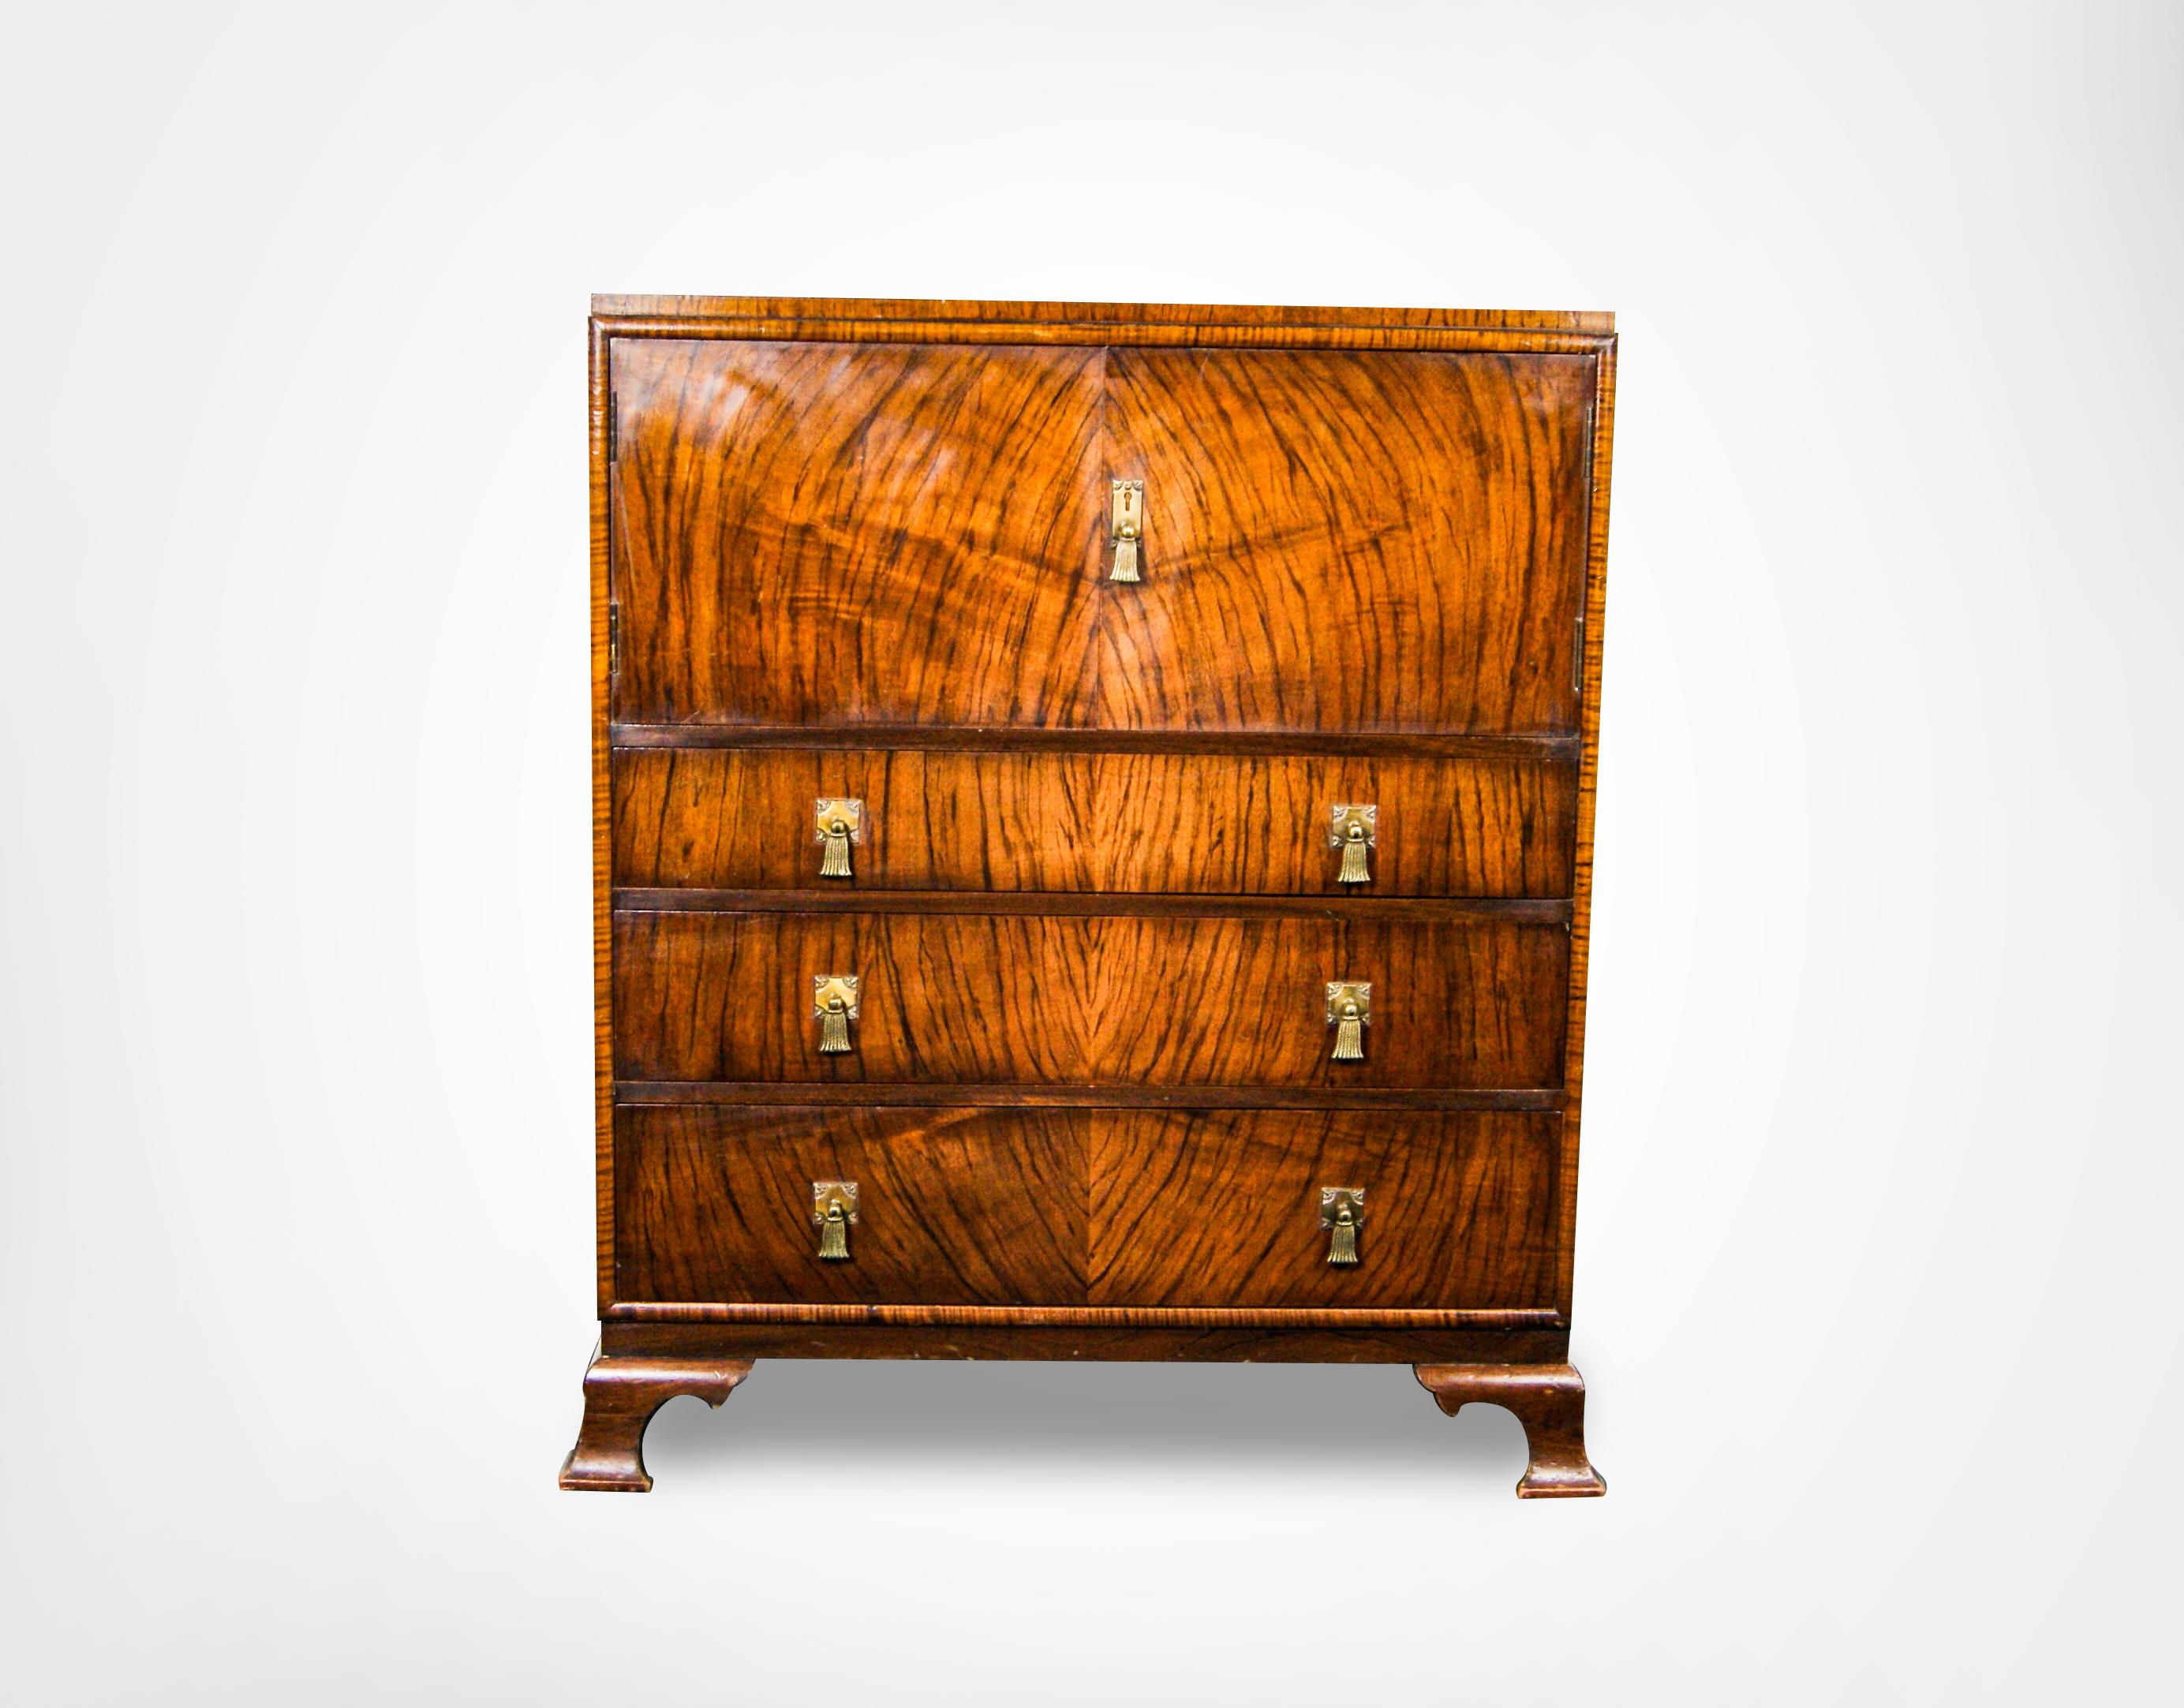 Antique British Art Deco Queen Anne style solid Mahogany linen press chest of drawers by renown furniture makers Waring & Gillow.
Constructed in their Lancaster factory during the George V era, circa 1930s.
Stunning Mahogany wood with a rare zebra